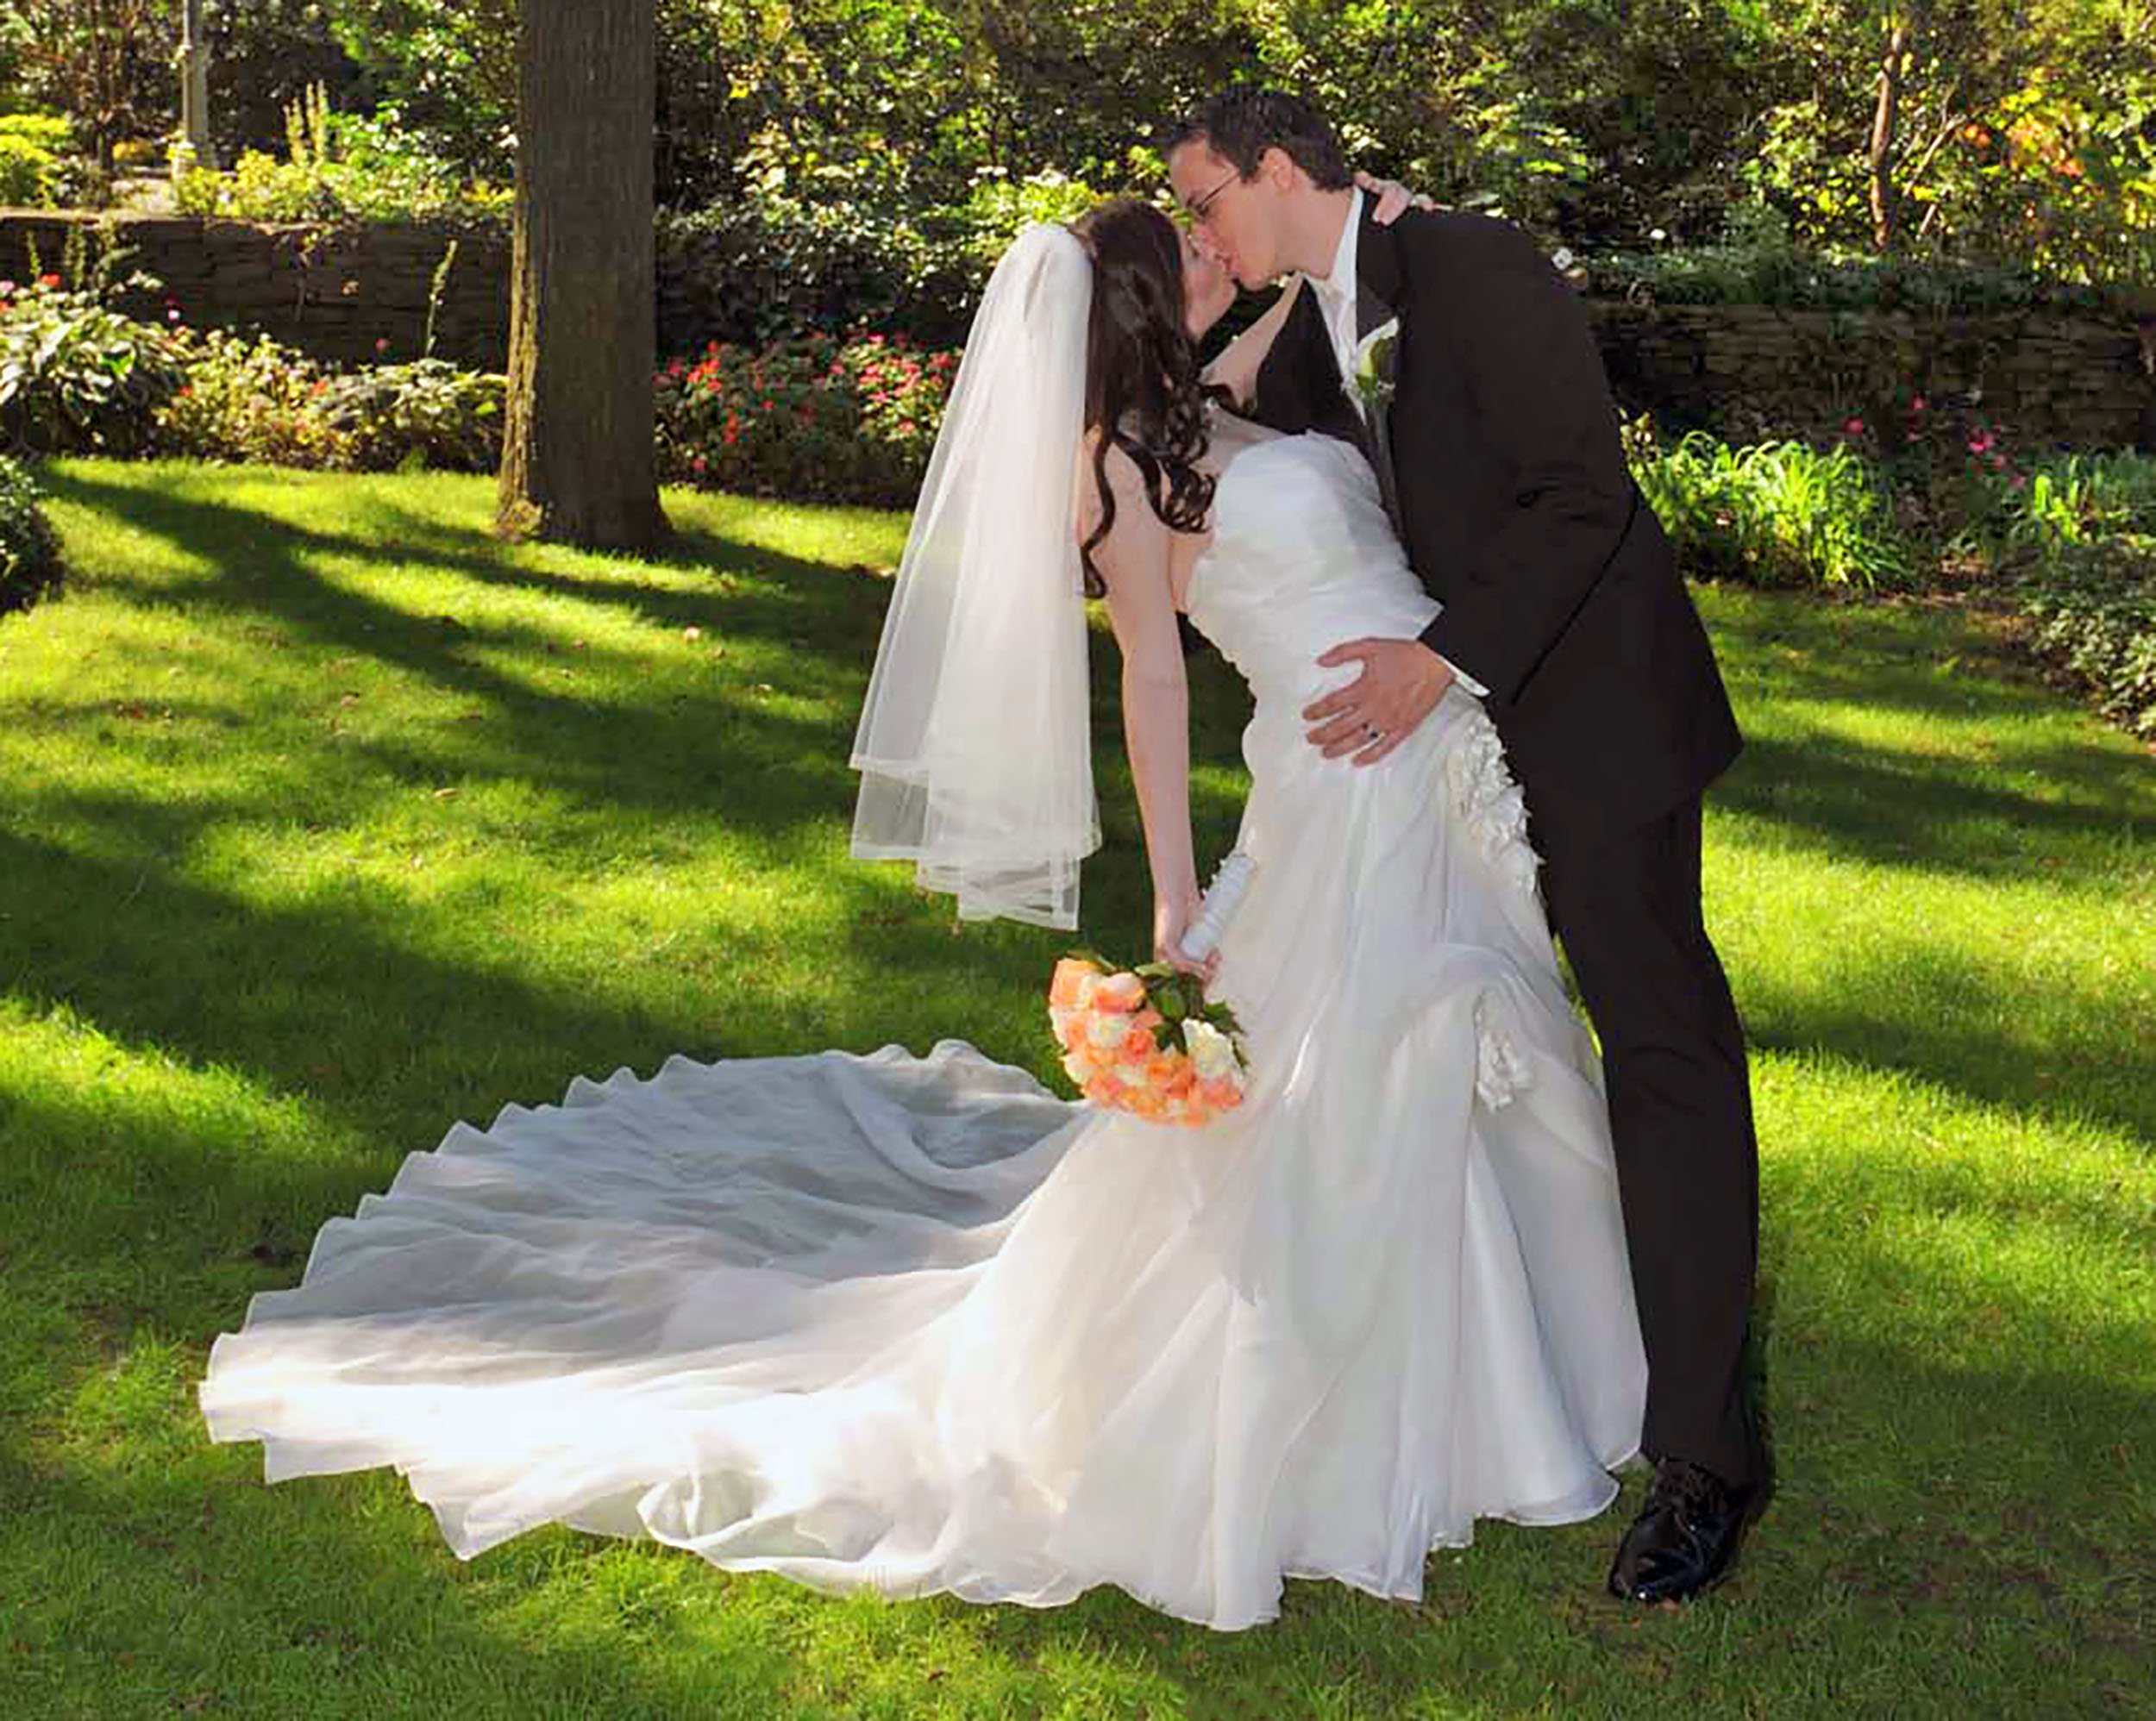 The Wedding Plaza, Floral Park NY, Long Island's best Designer Bridal Gowns,  Mother's Dresses Bridesmaid, and Tuxedos